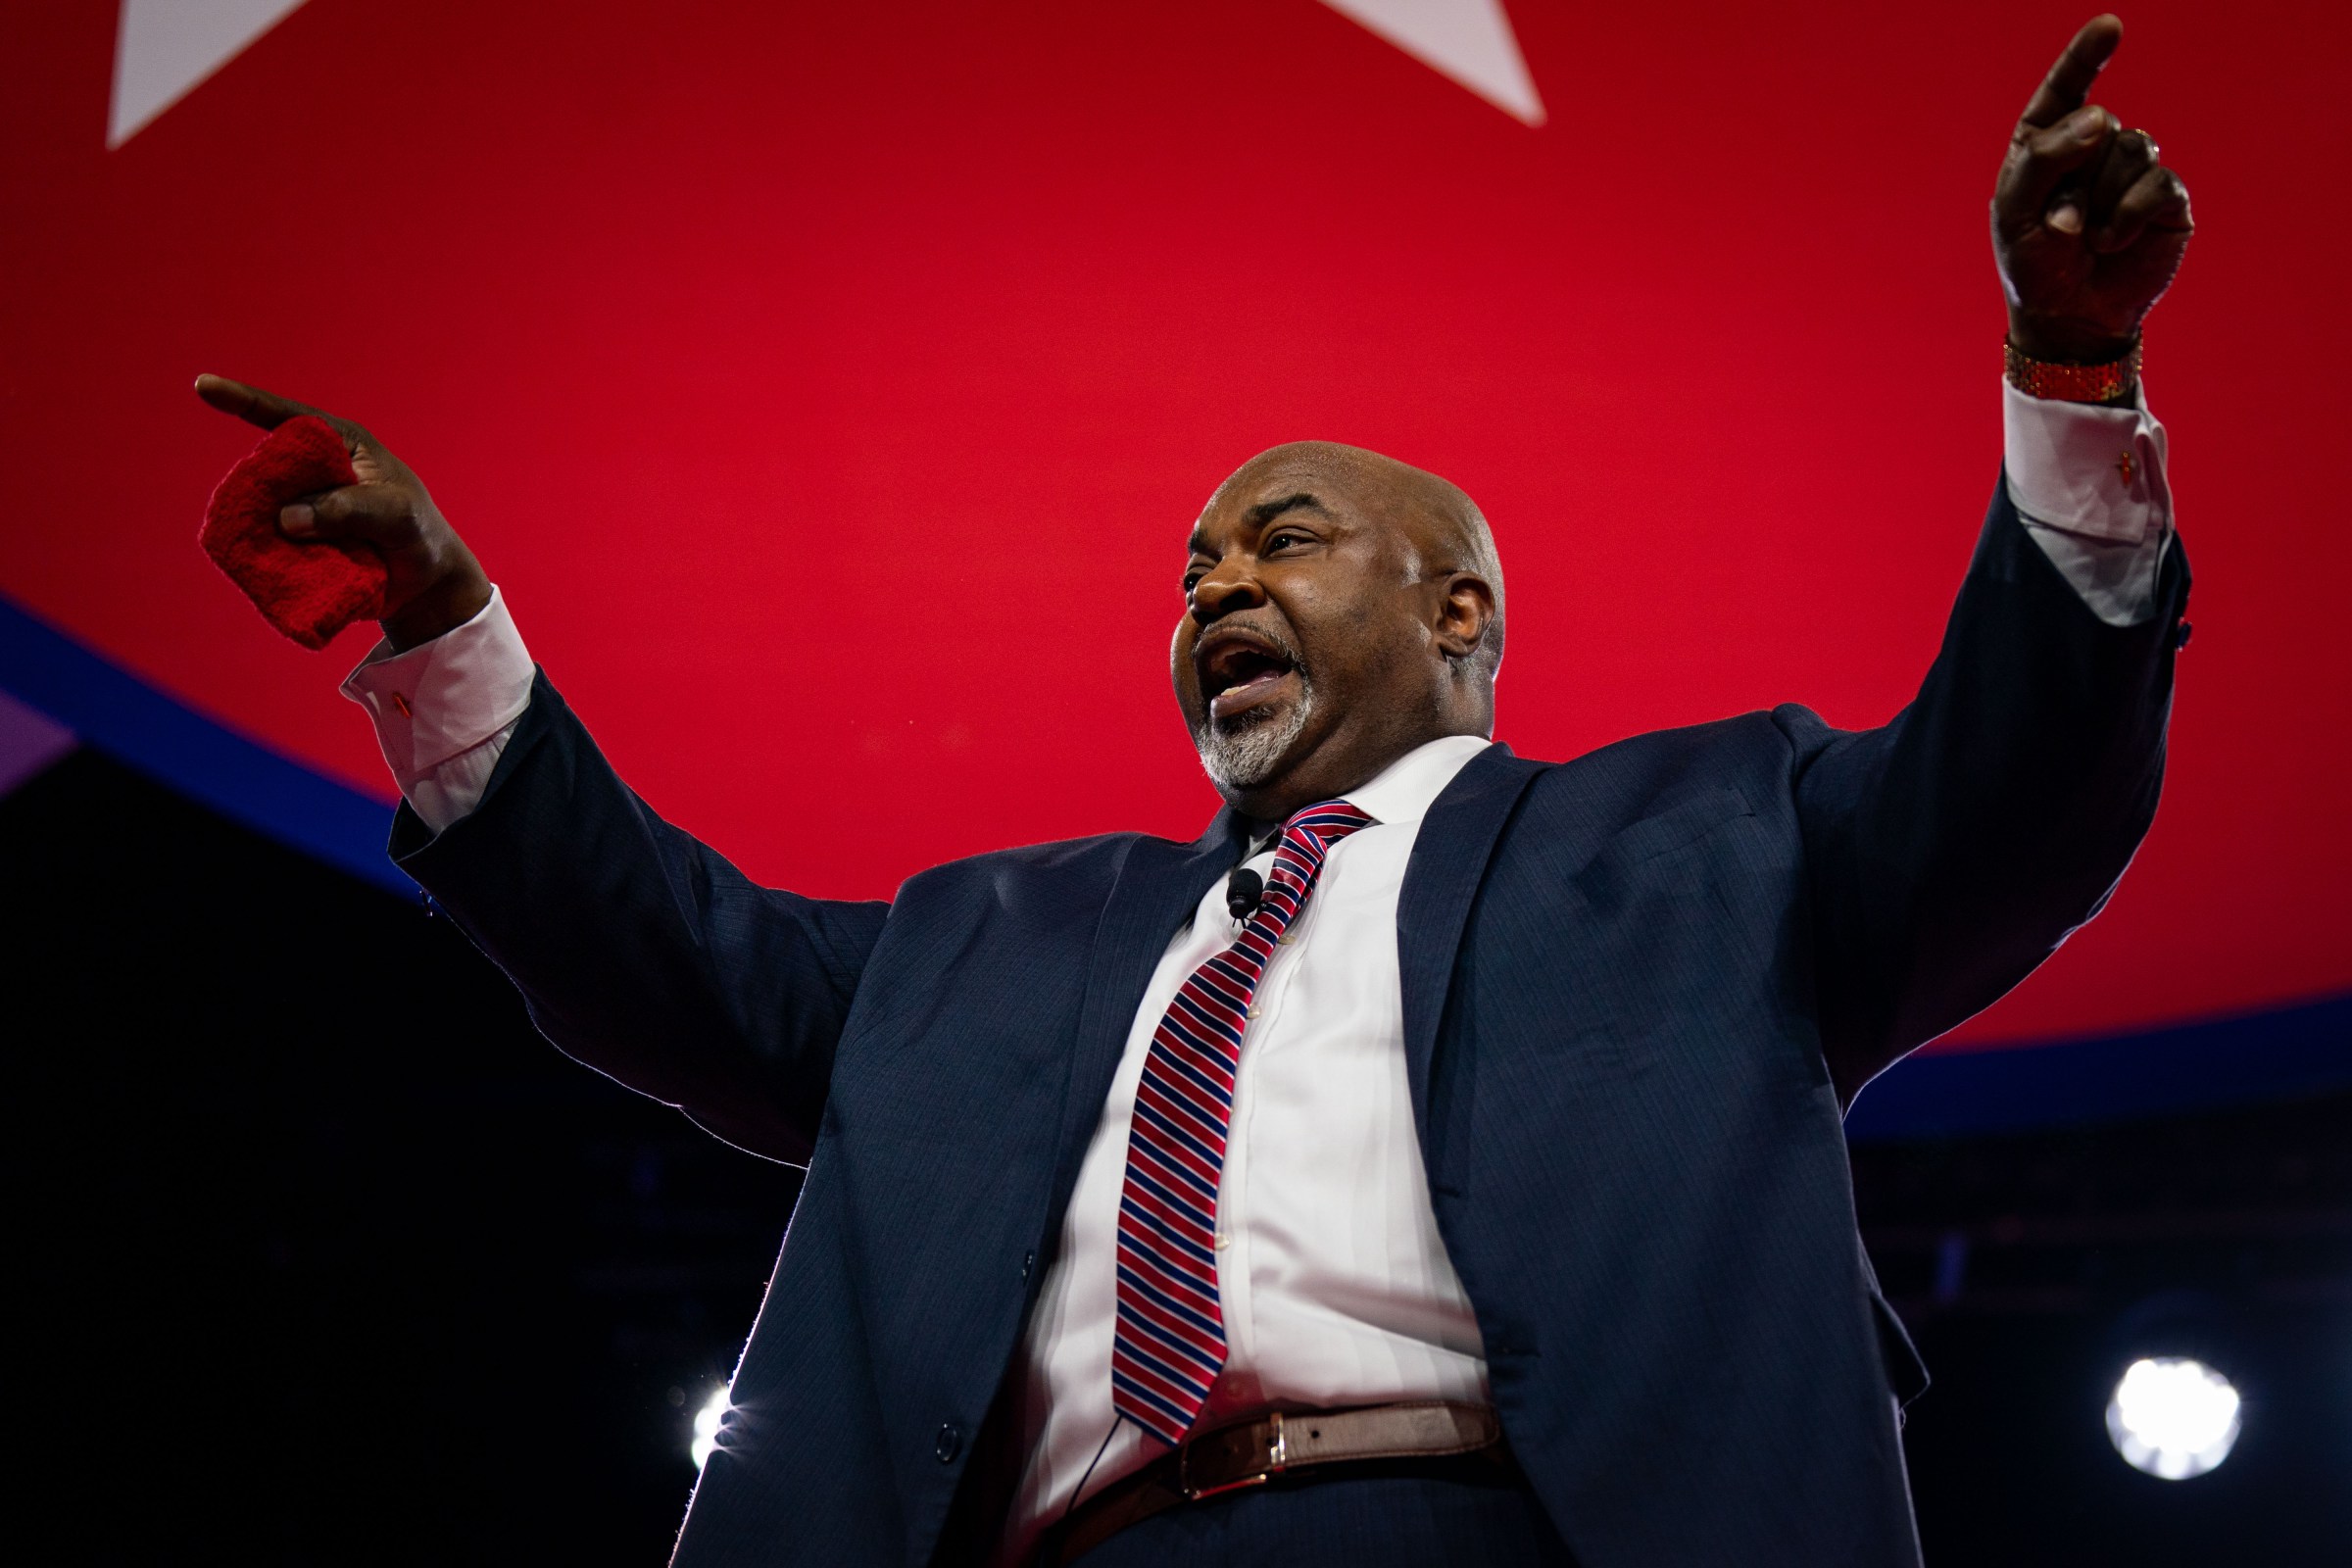 Mark Robinson, the North Carolina GOP nominee for governor, is off the rails even by MAGA standards